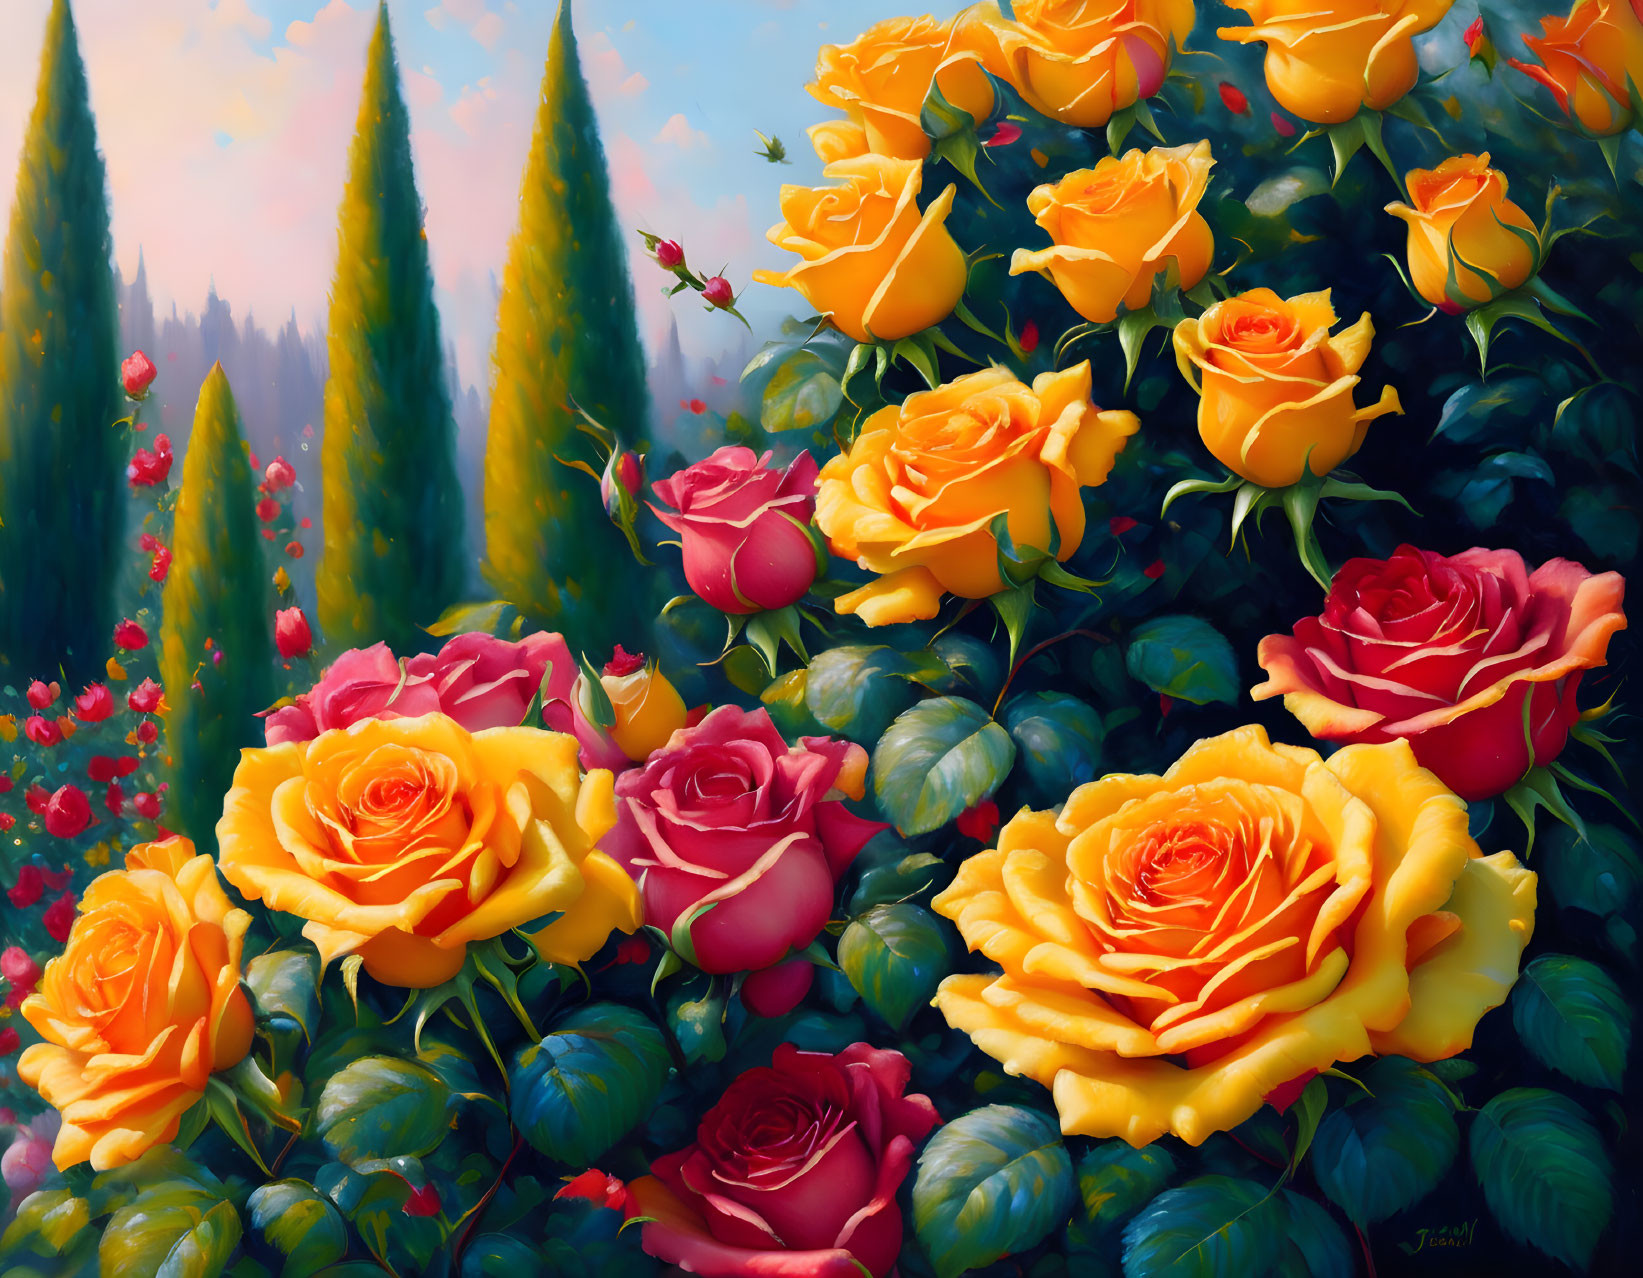 Colorful painting of yellow and red roses with cypress trees under a blue sky